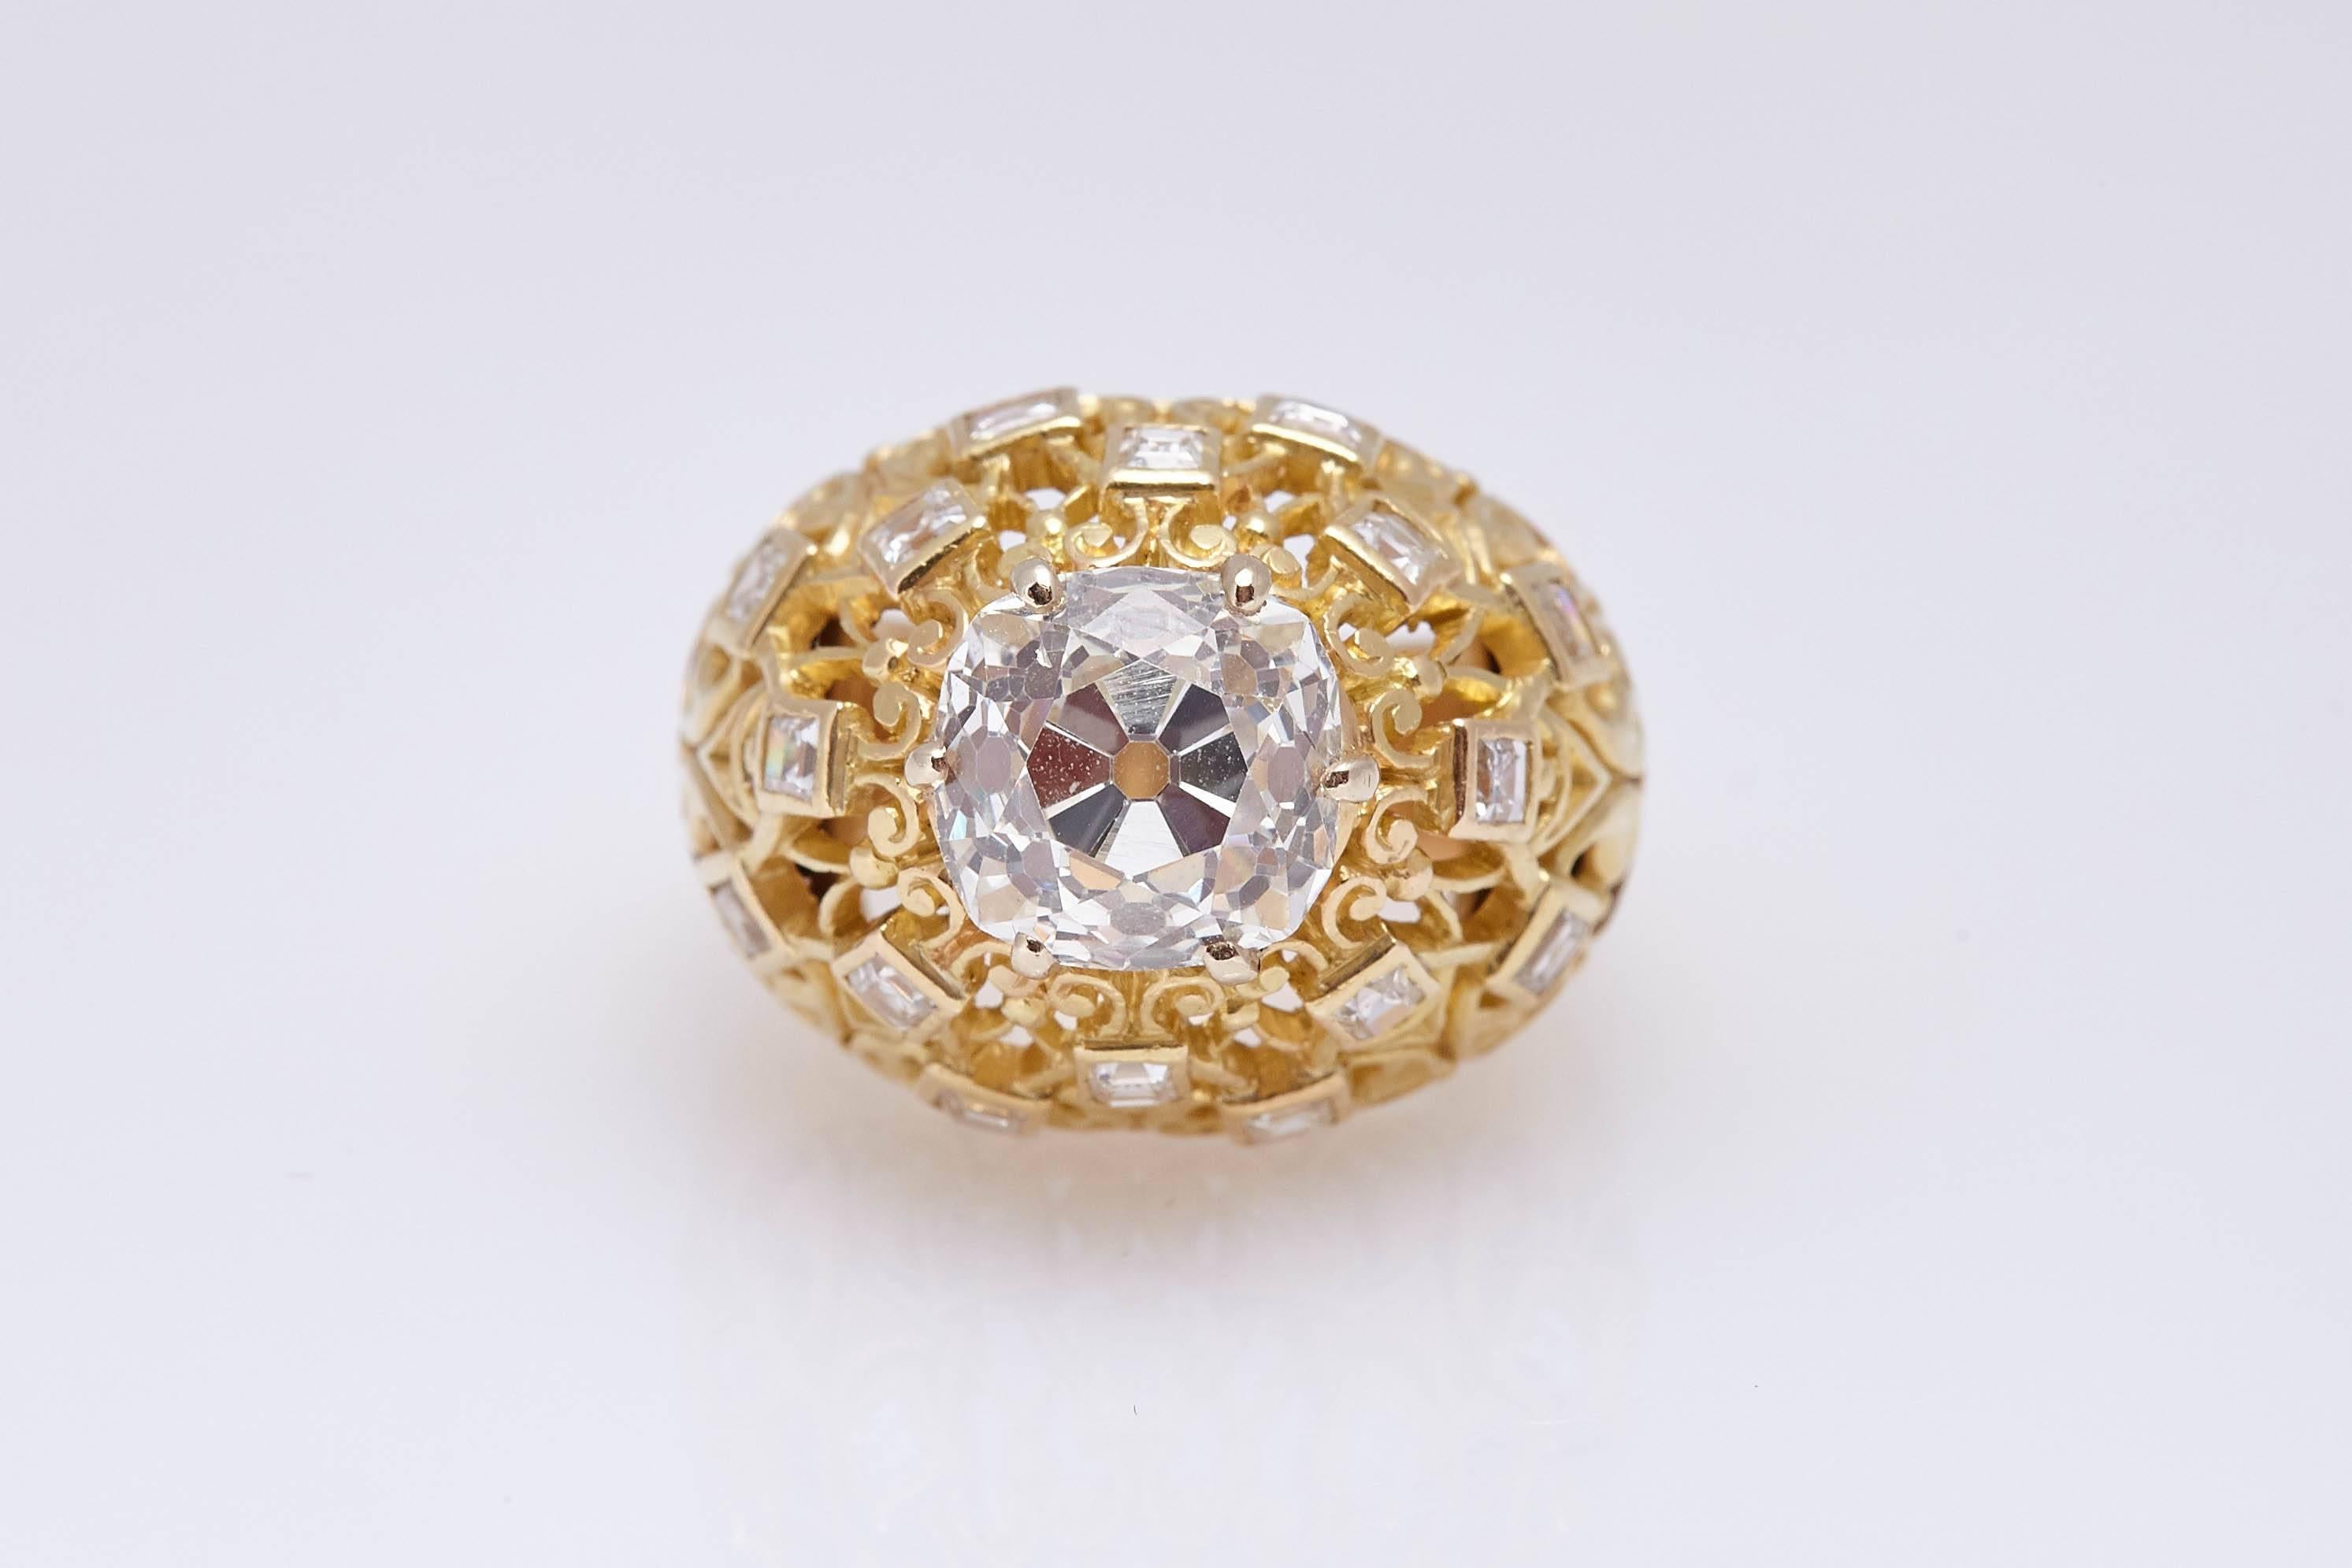 A Cartier retro dome shaped ring in 18kt yellow gold, the mounting embellished with fine round cut diamonds, showcasing an Old Mine Brilliant Cut Diamond weighing 4.24 (L Color, SI1 Clarity - GIA Certificate). Made in France, circa 1950s.